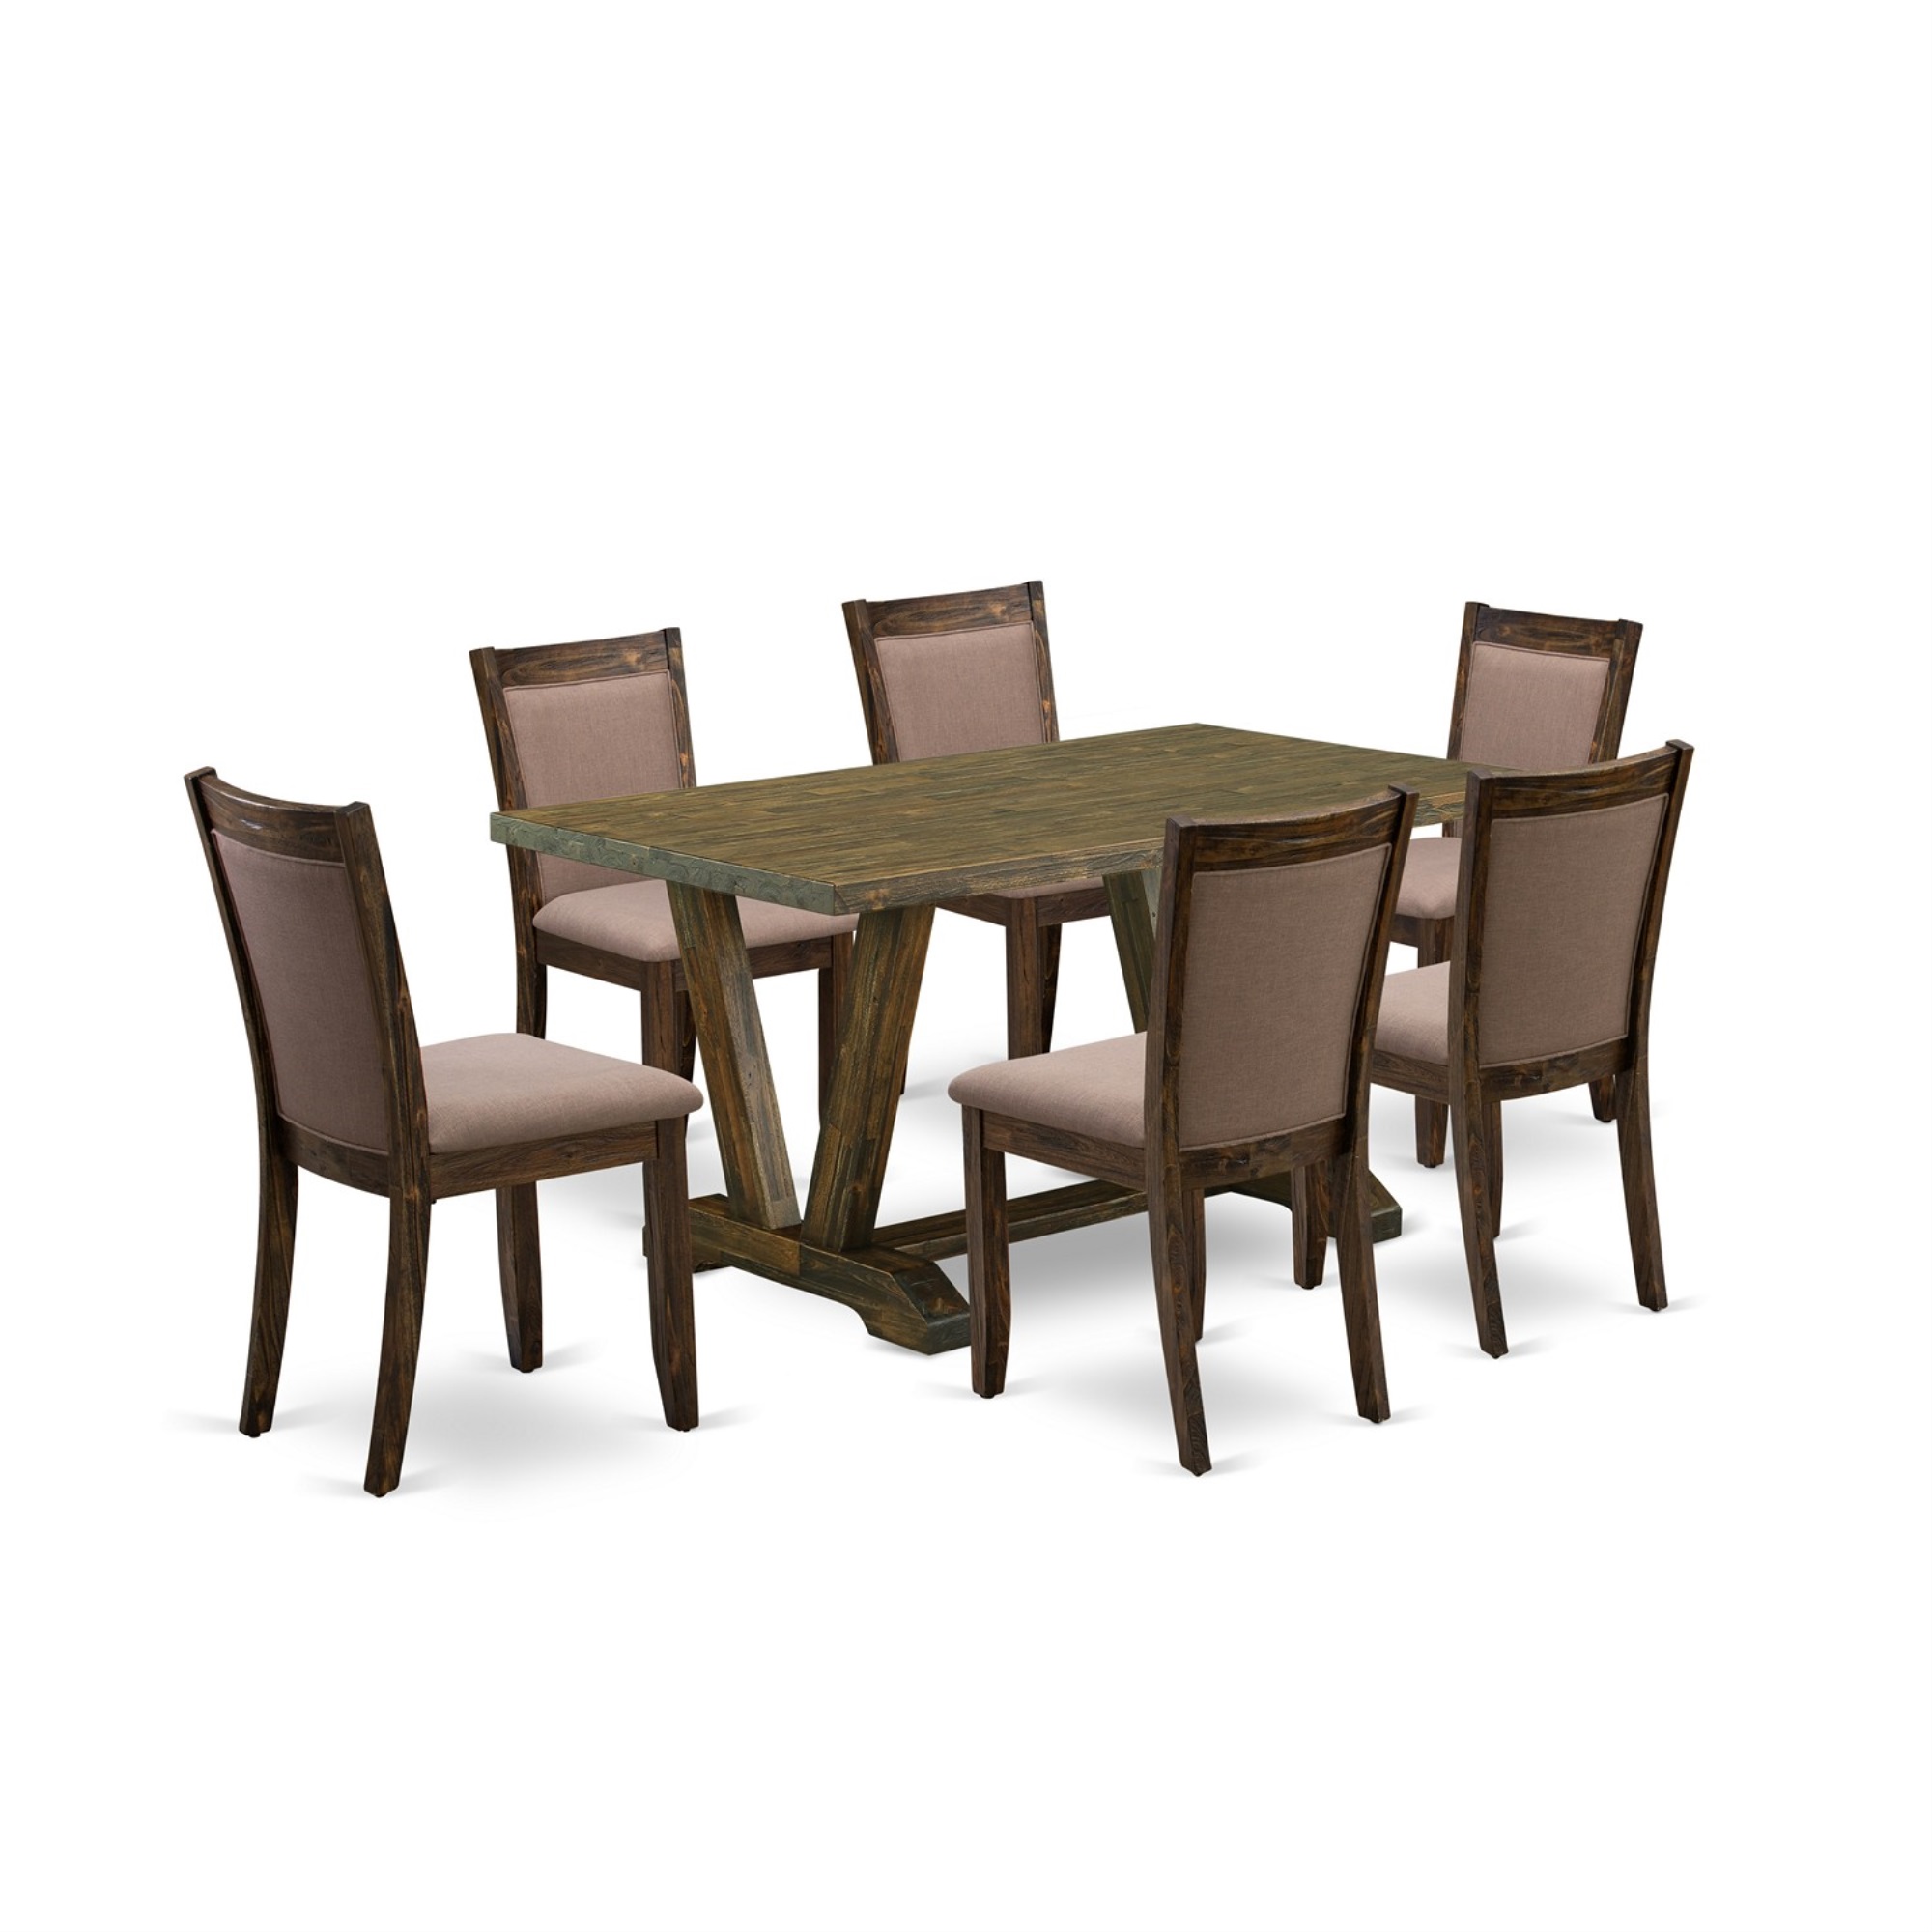 East West Furniture V776MZ748-7 7Pc Kitchen Set - Rectangular Table and 6 Parson Chairs - Multi-Color Color